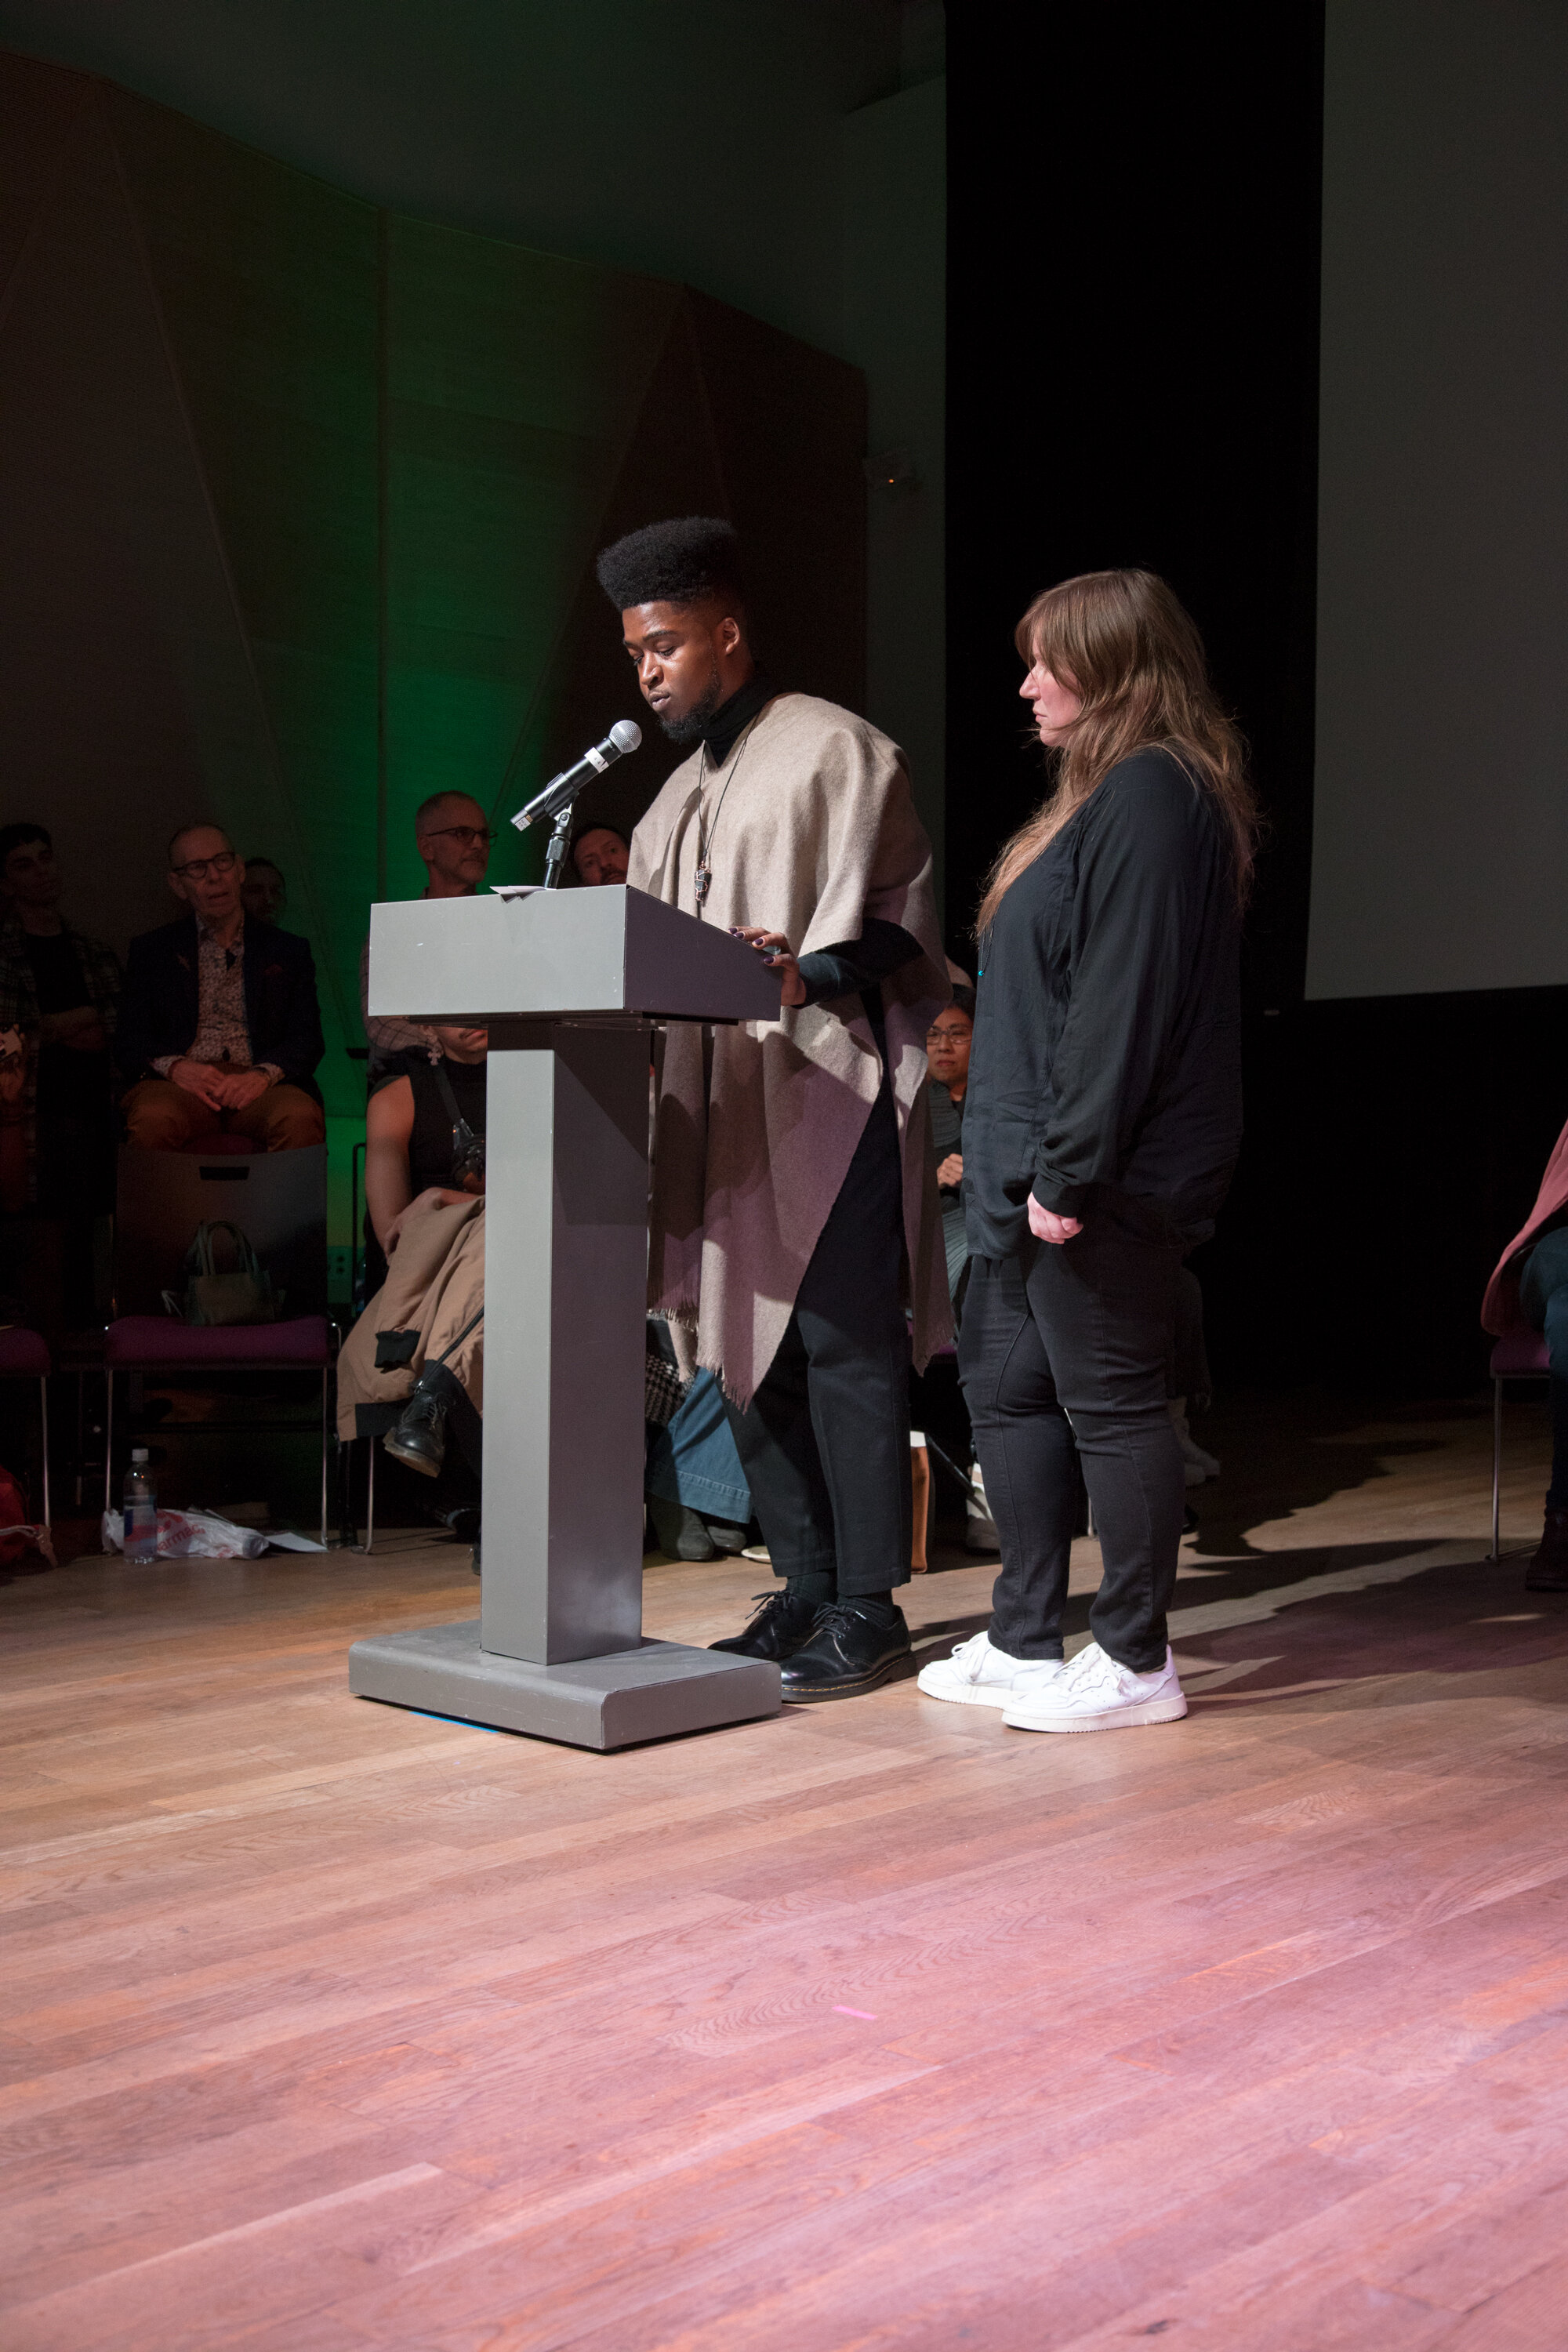 2019 Recent Work Judges present the award. Left to right: Jayson P. Smith and Jeanine Oleson (photo by Cayetana Suzuki)